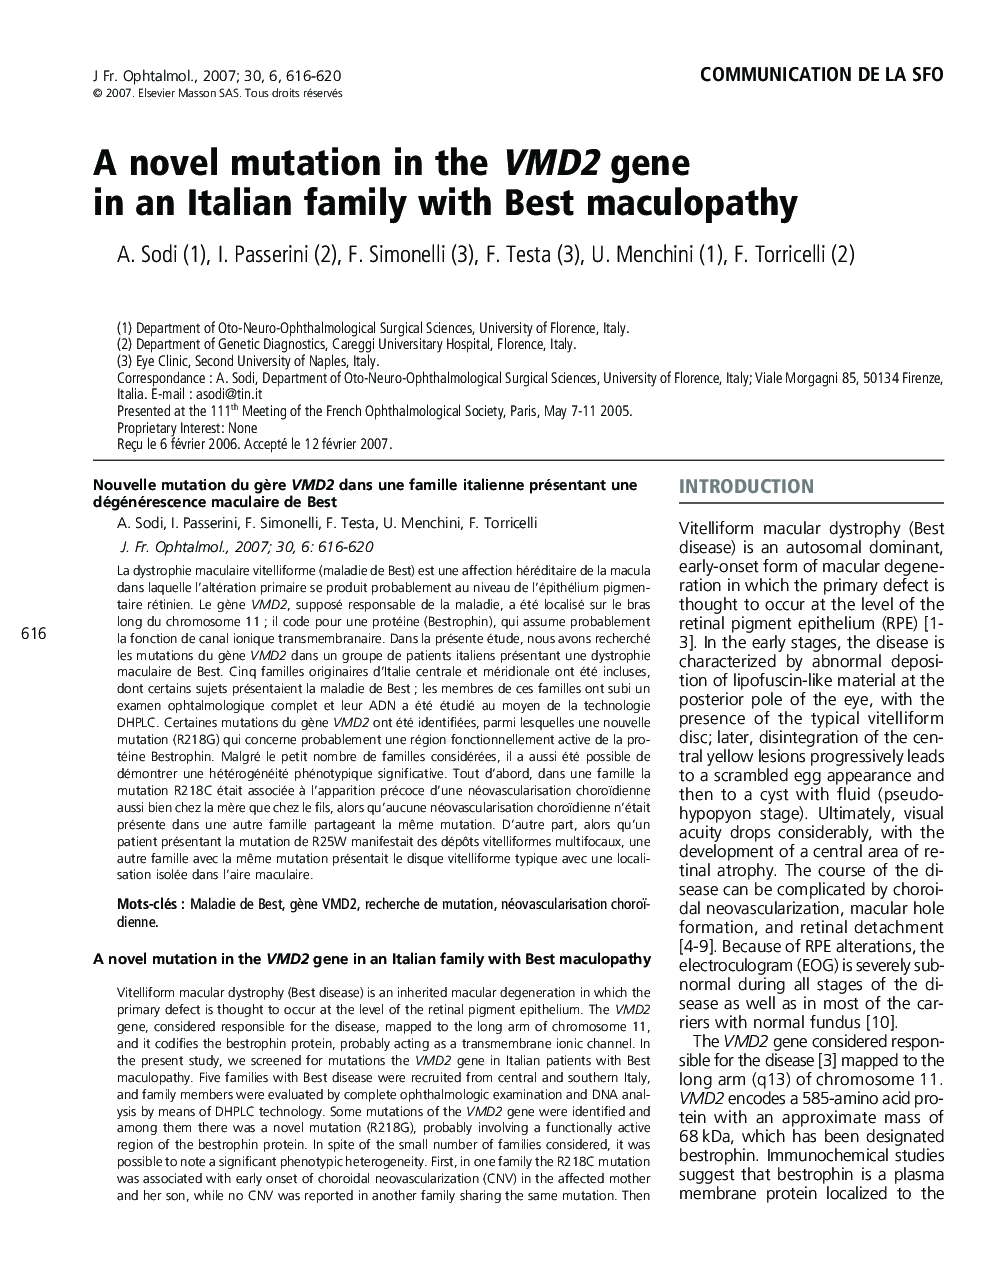 A novel mutation in the VMD2 gene in an Italian family with Best maculopathy